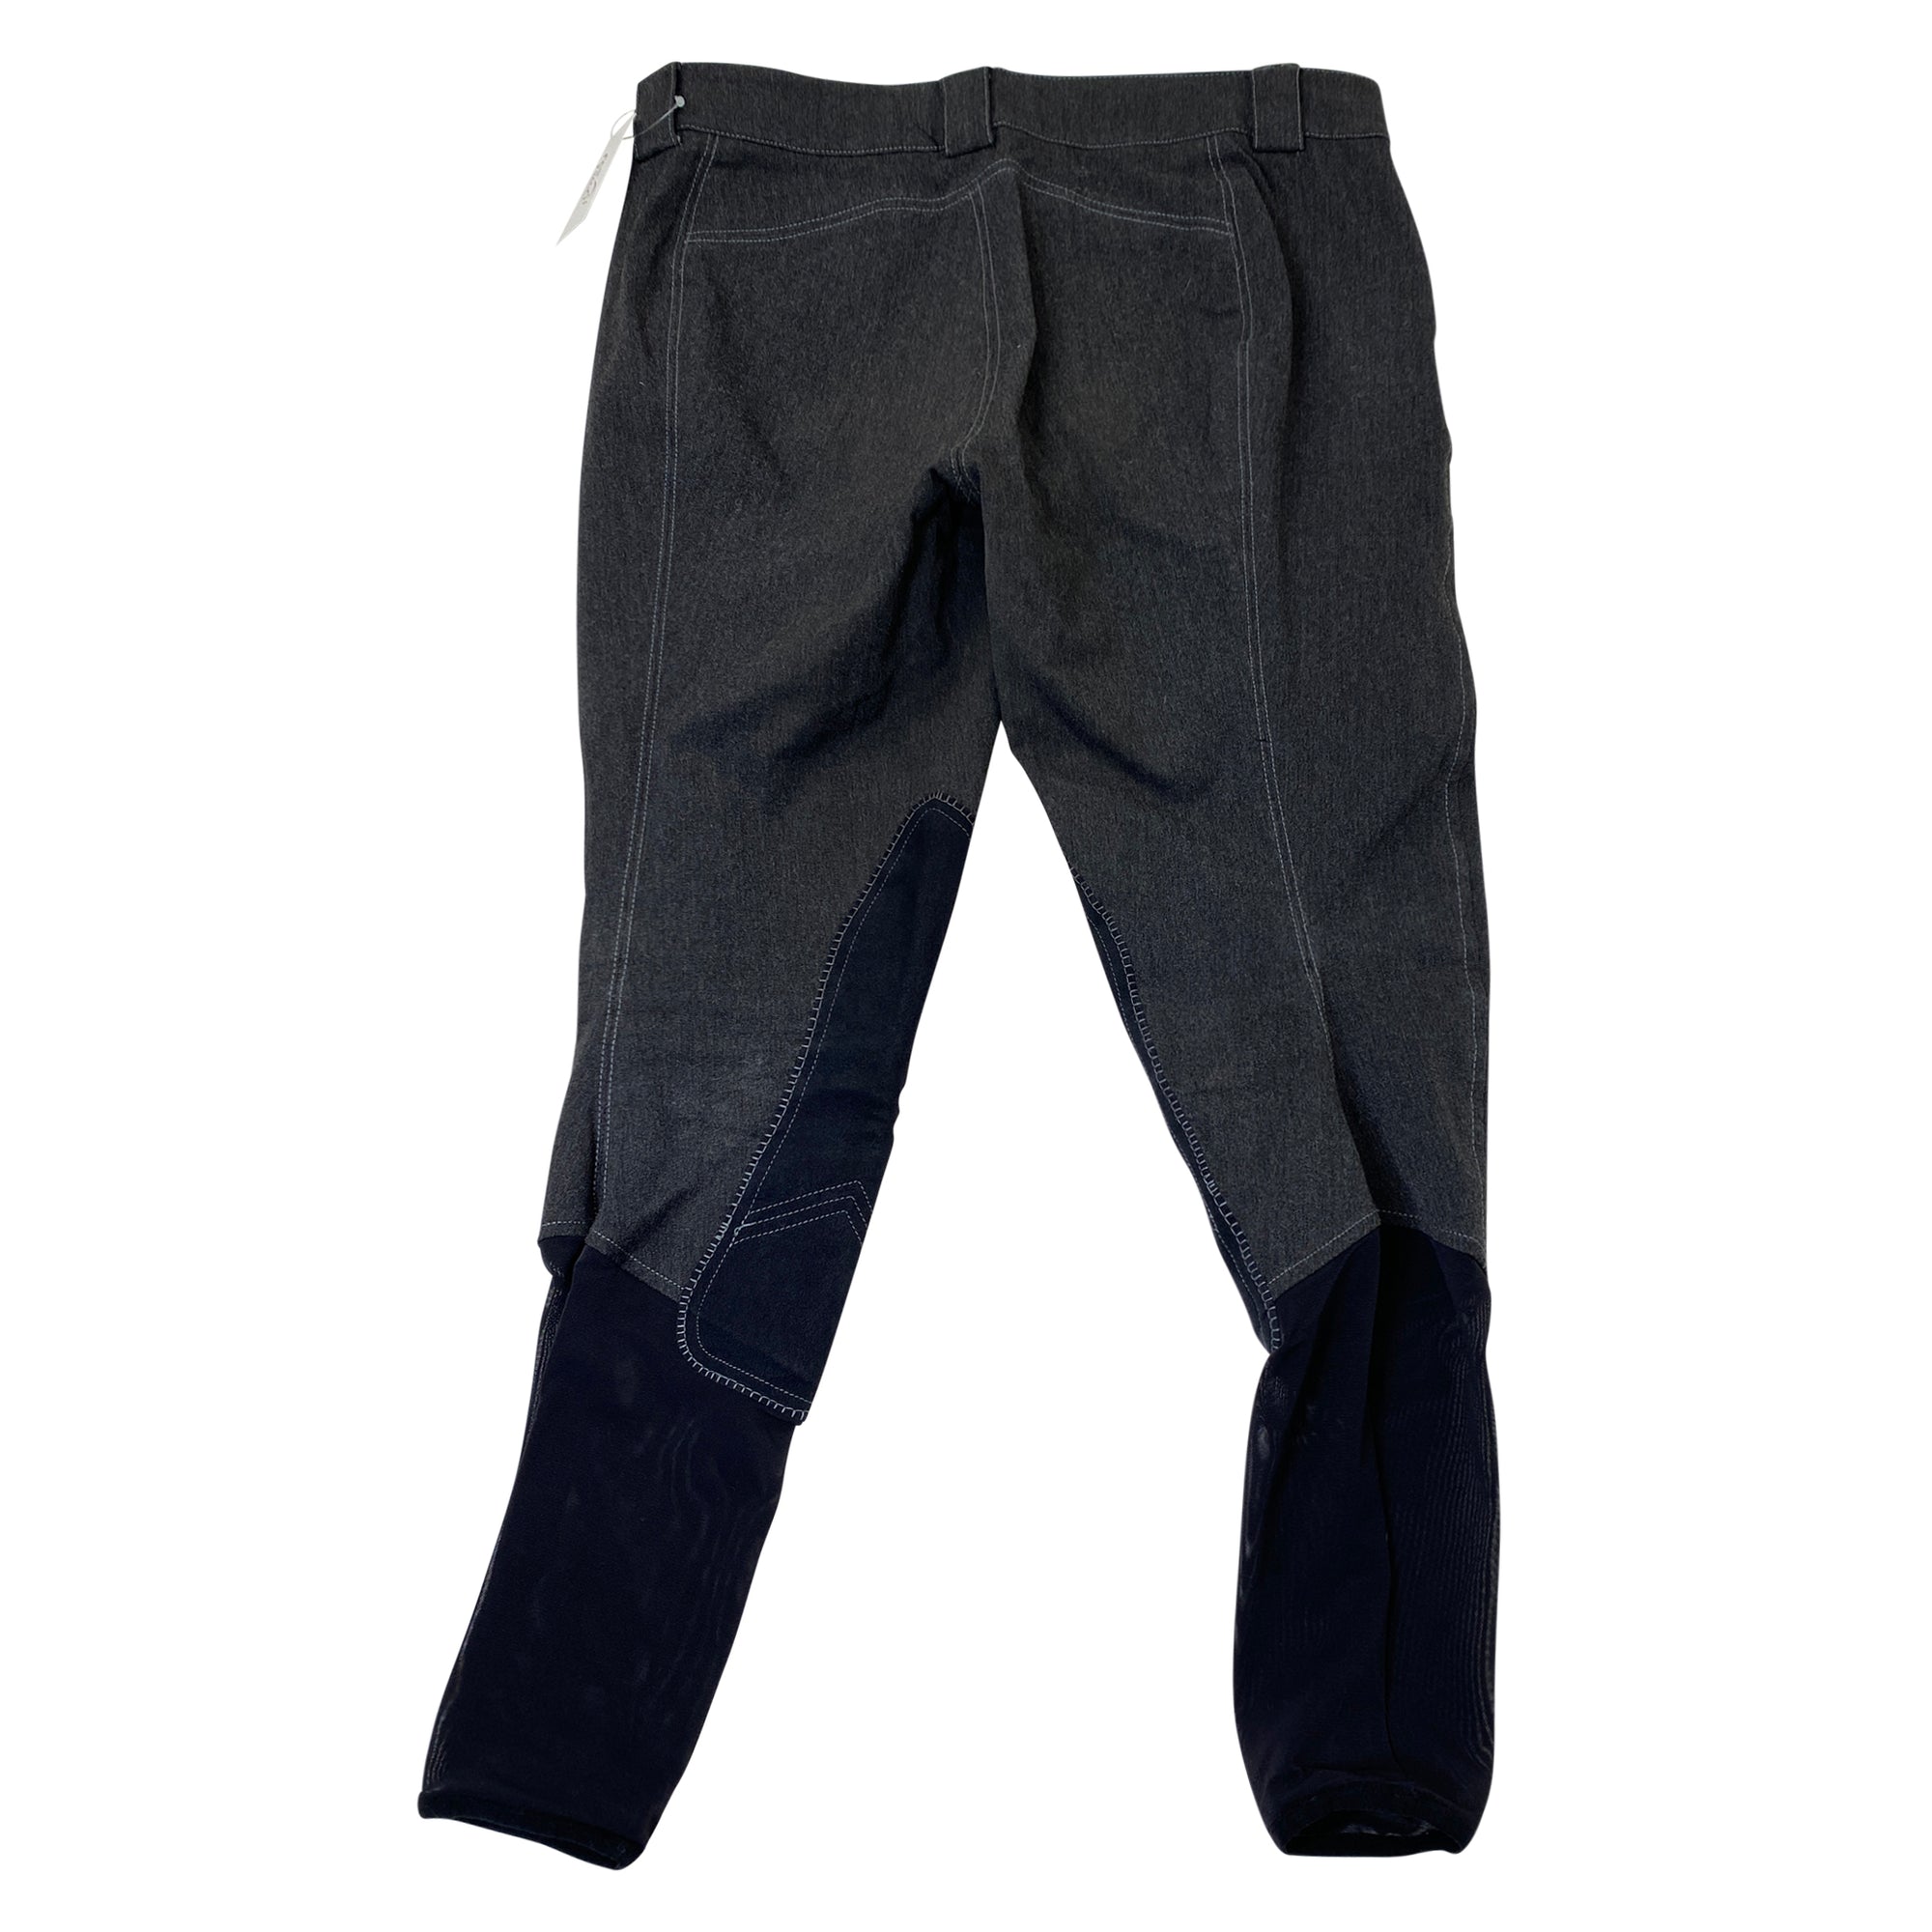 FITS Knee Patch Breeches in Charcoal 